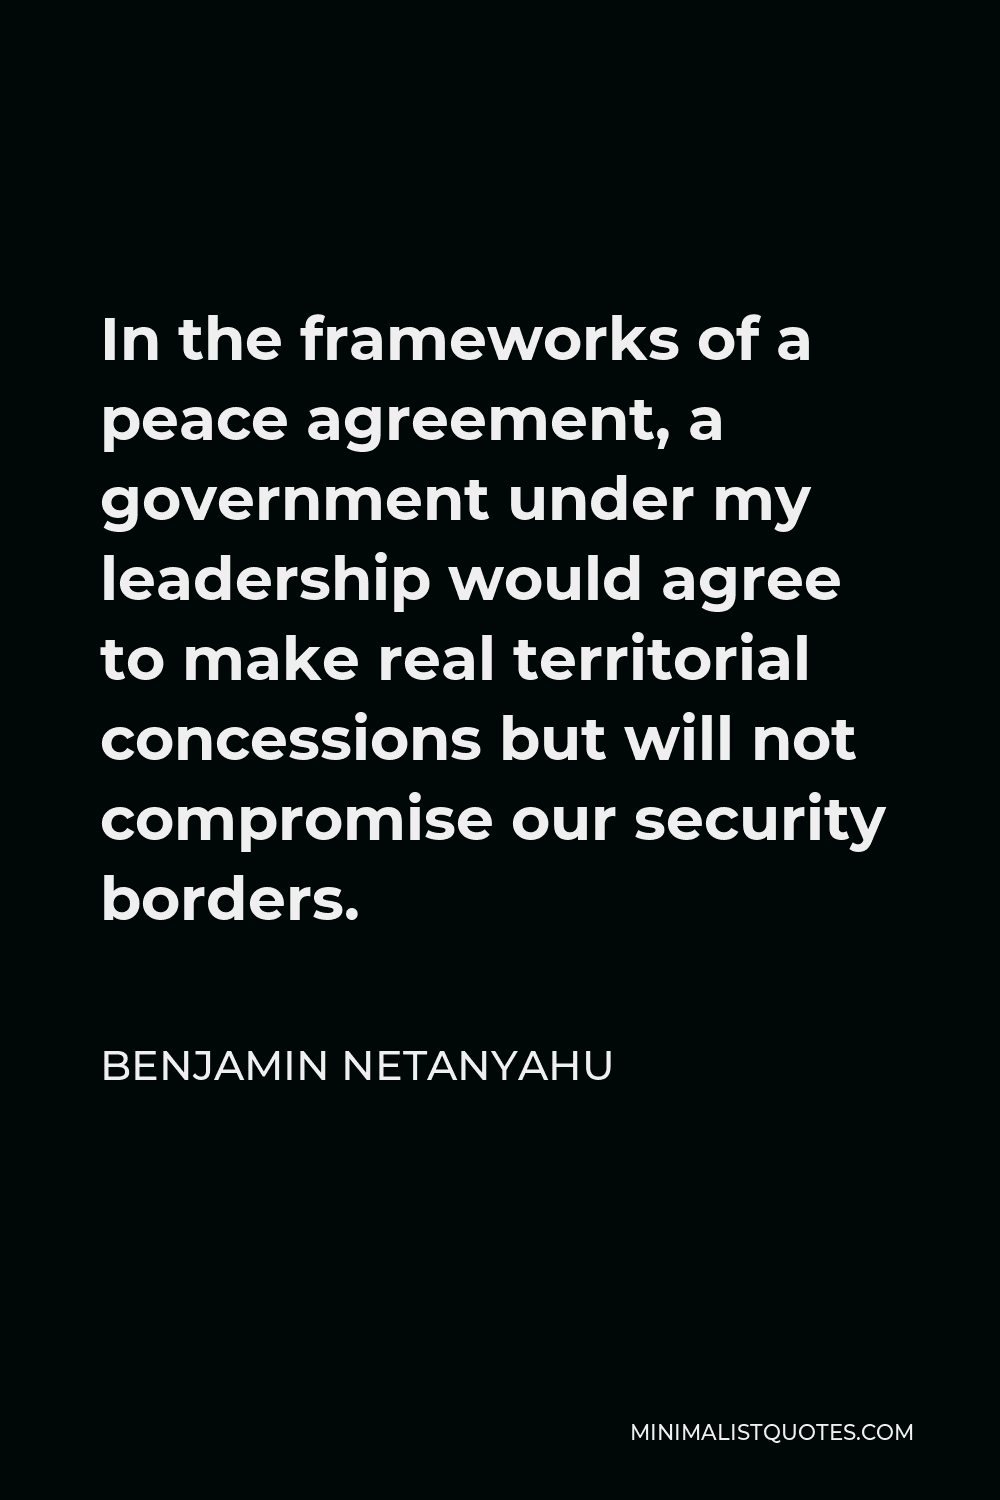 Benjamin Netanyahu Quote - In the frameworks of a peace agreement, a government under my leadership would agree to make real territorial concessions but will not compromise our security borders.